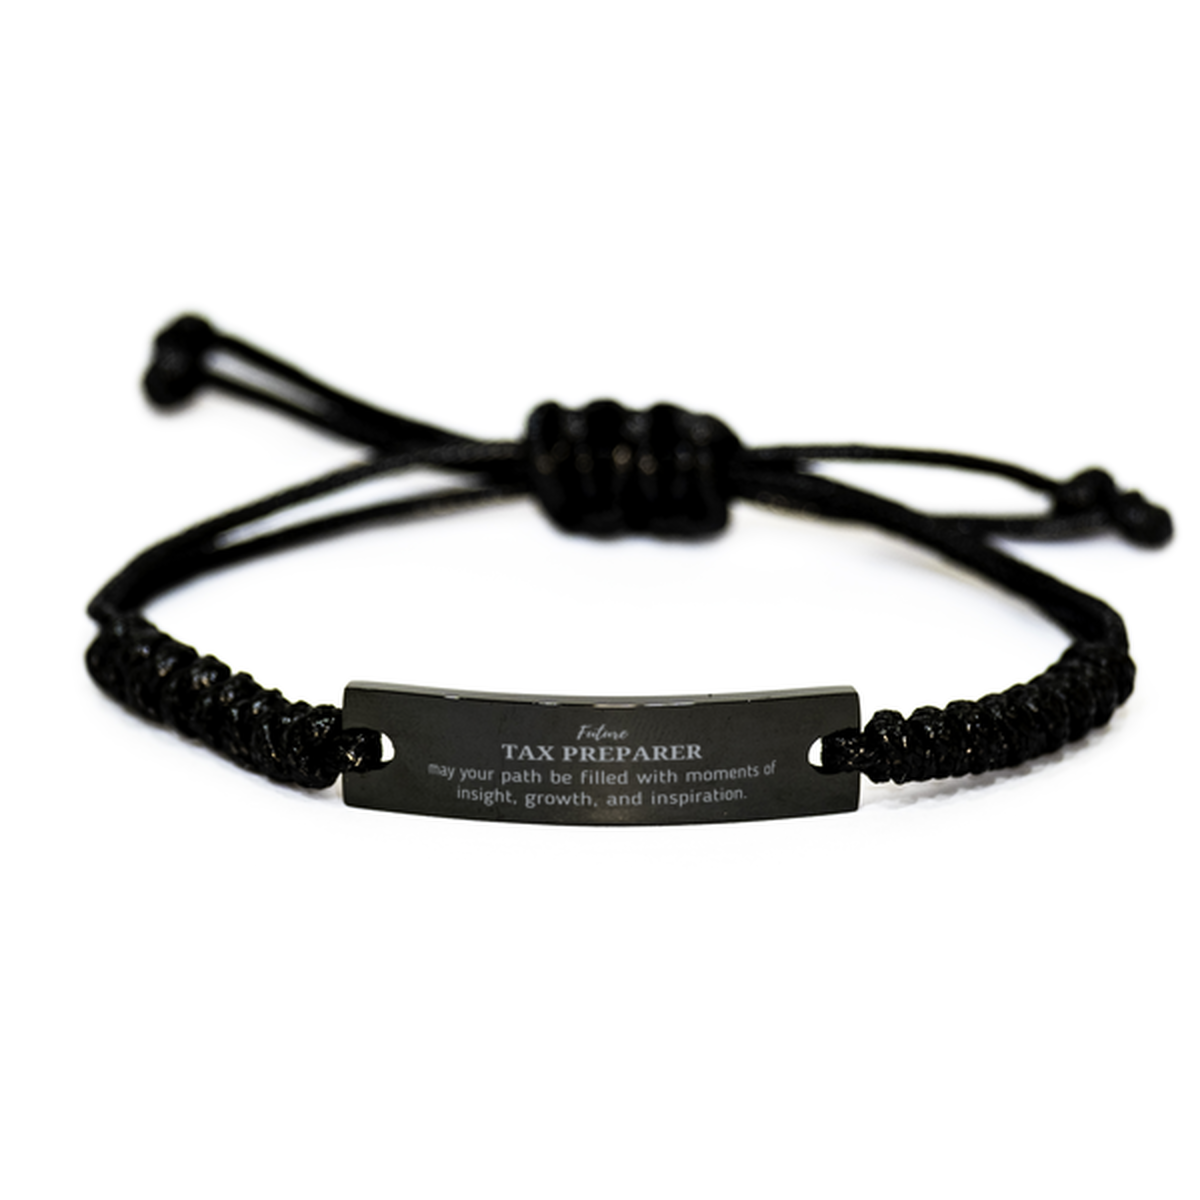 Future Tax Preparer Gifts, May your path be filled with moments of insight, Graduation Gifts for New Tax Preparer, Christmas Unique Black Rope Bracelet For Men, Women, Friends